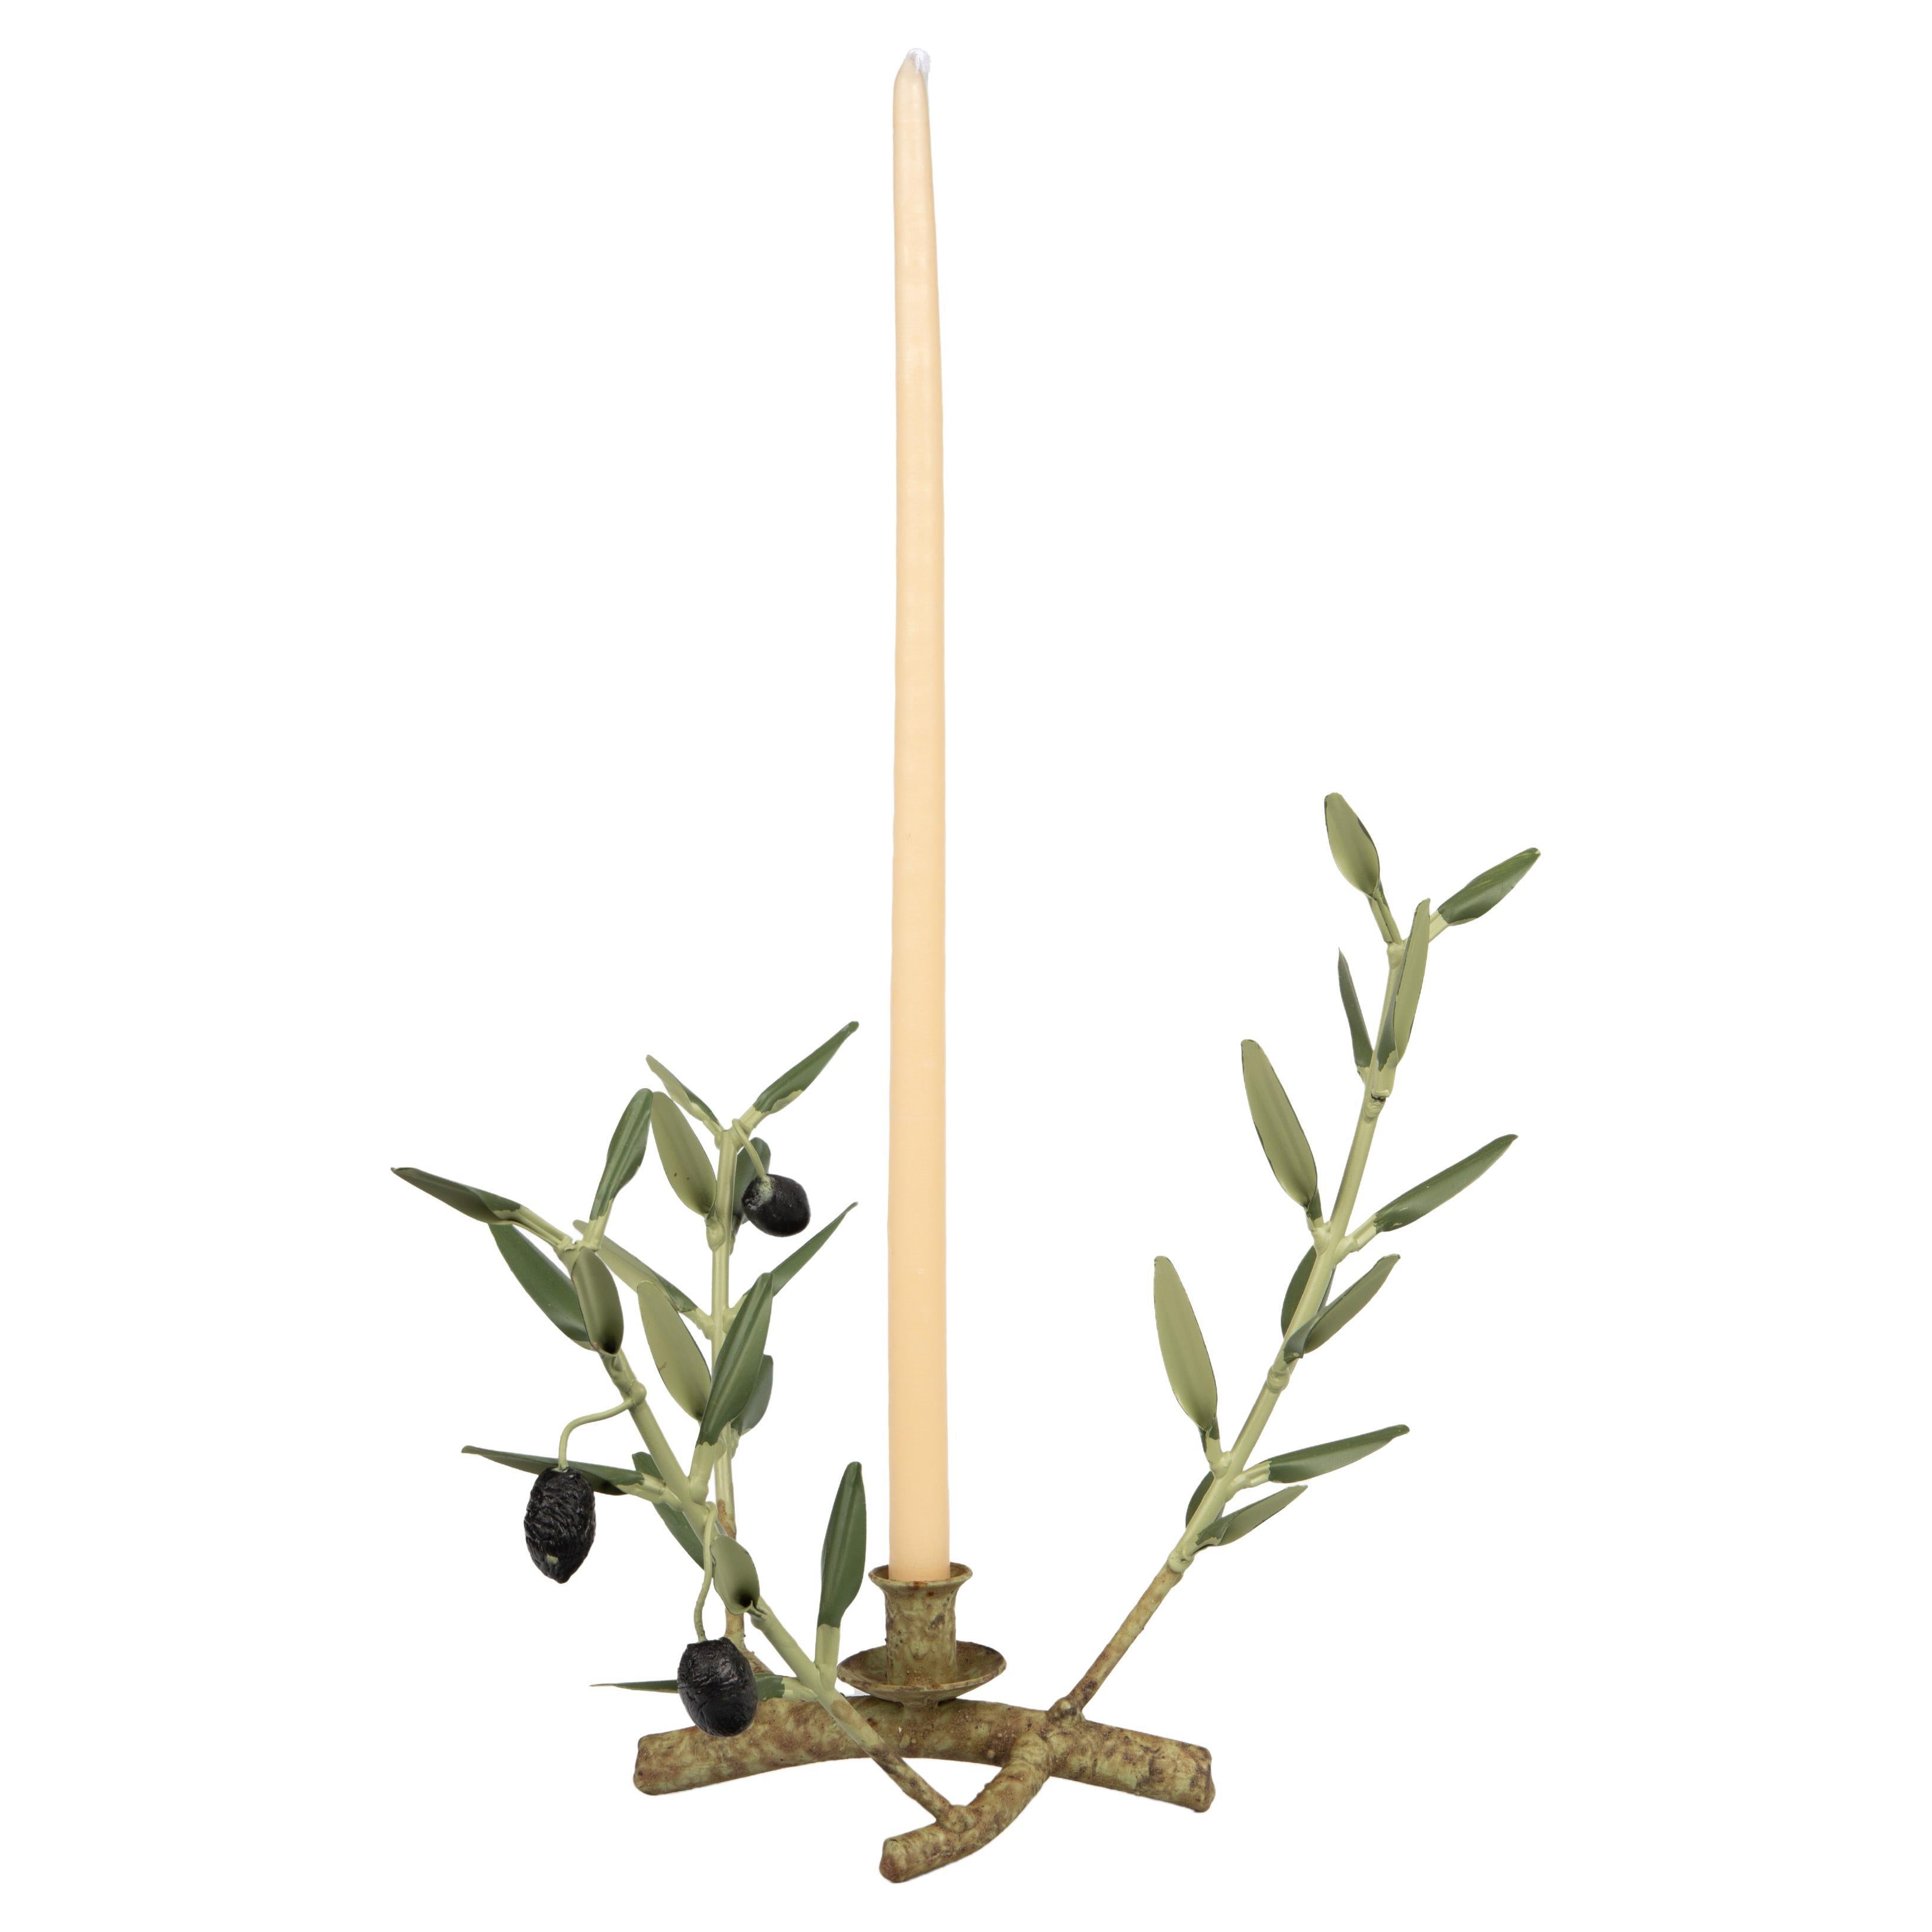 Handmade Olive Branch Candle Holder from Provence